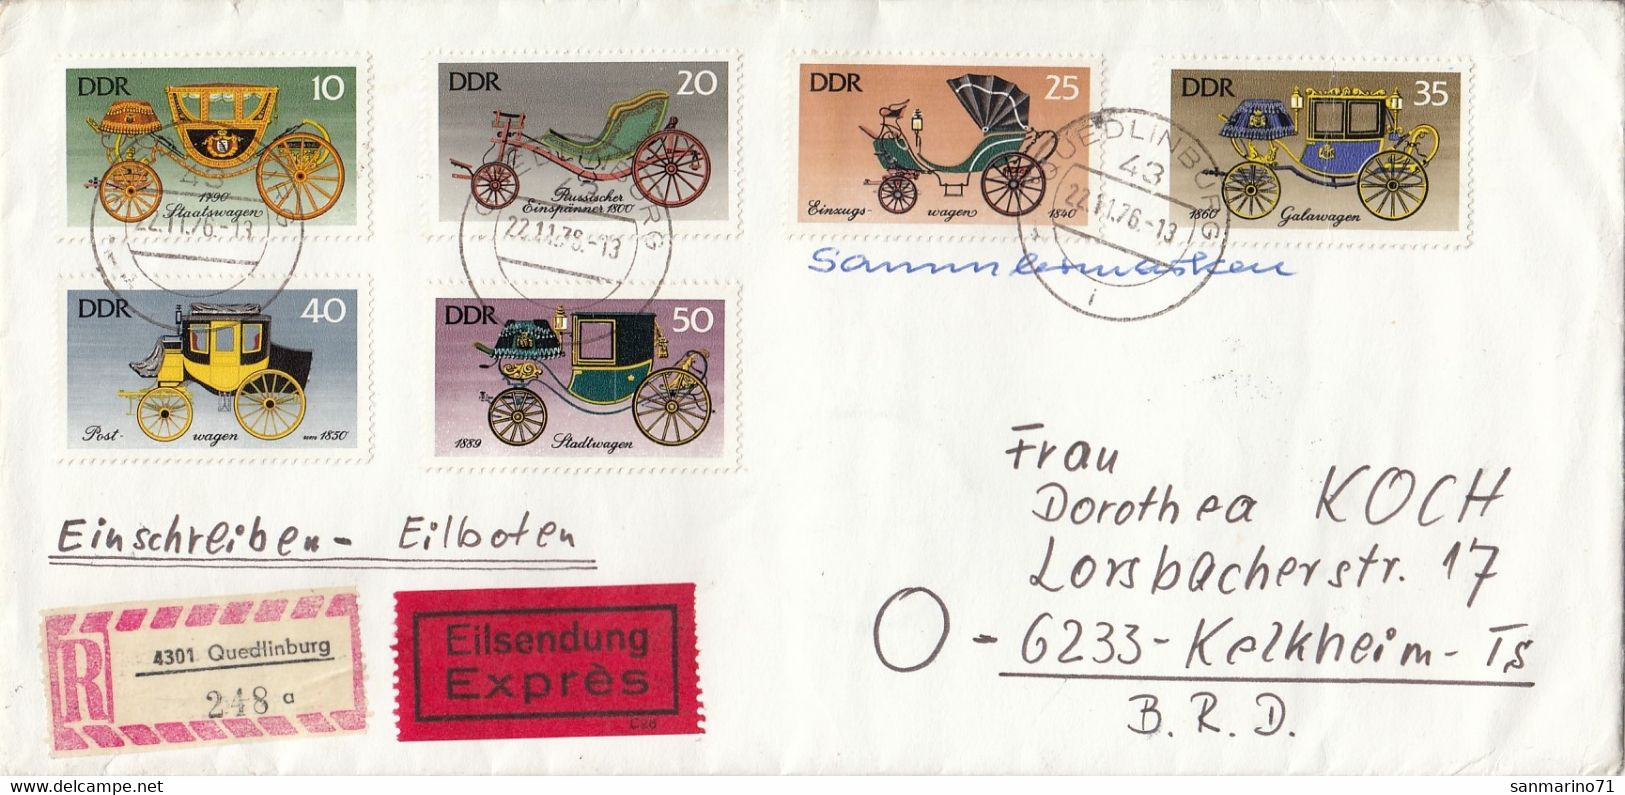 GERMANY DDR Cover 29 - Diligences